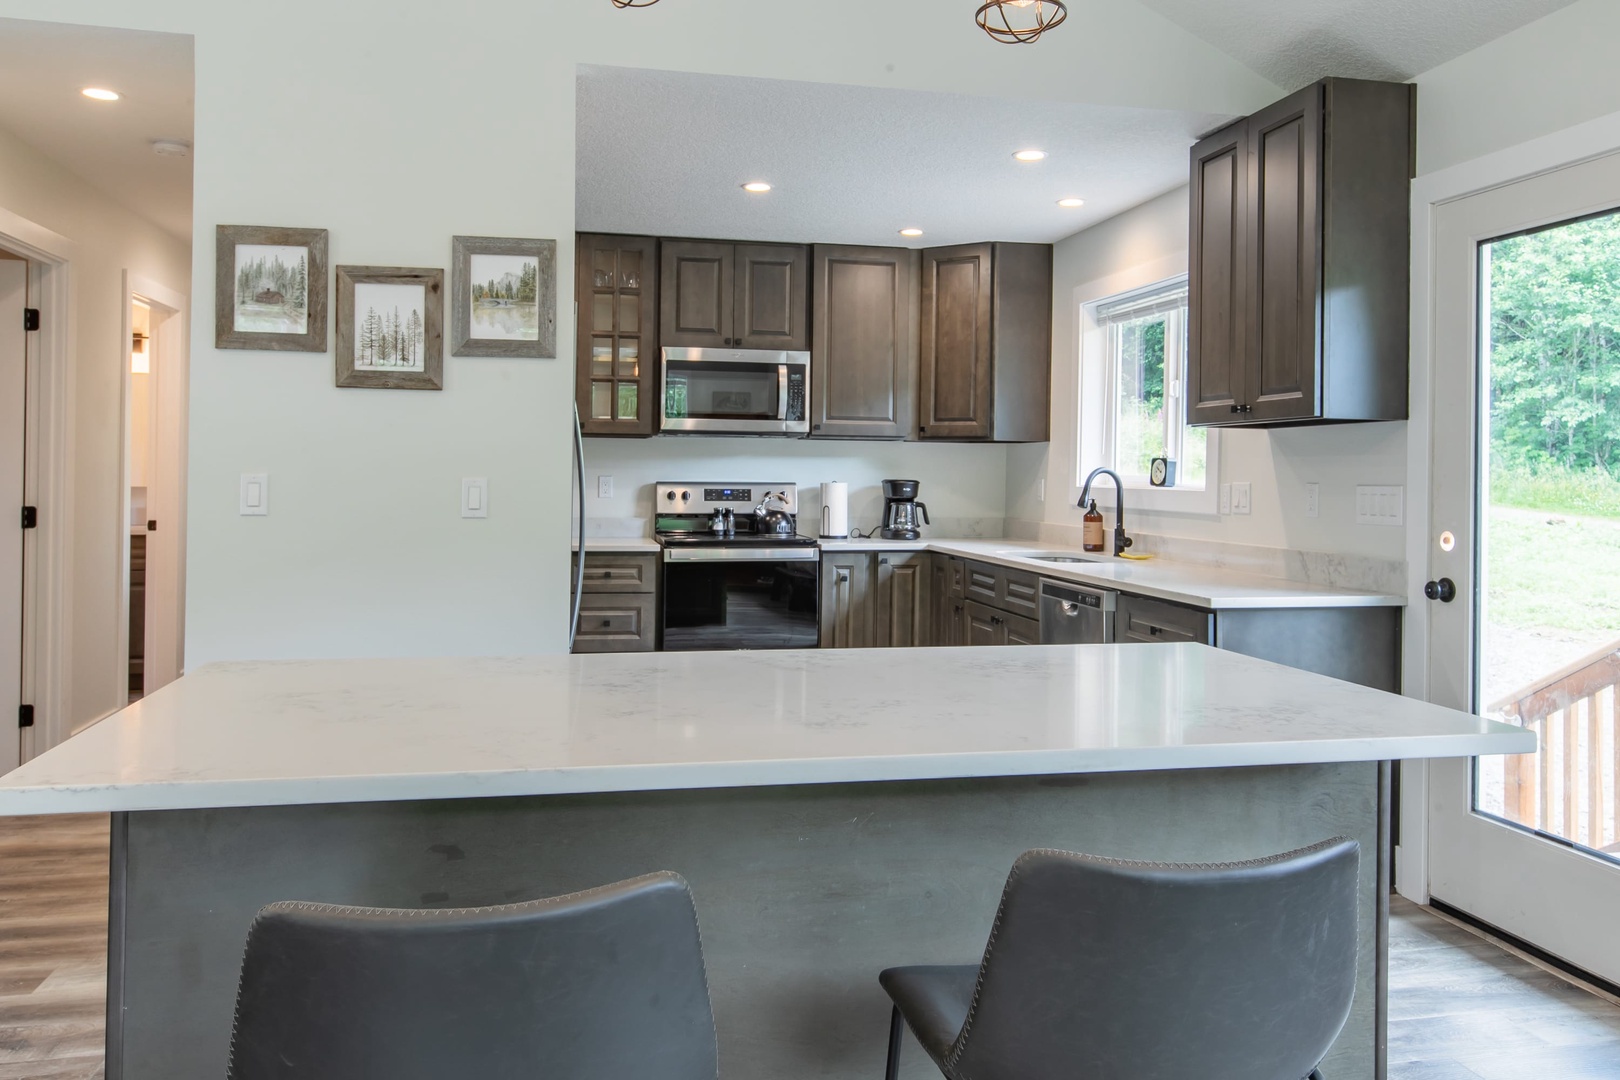 Nehalem Vacation Rentals, Nehalem Coastal Oasis - Play chef in this fully equipped kitchen!